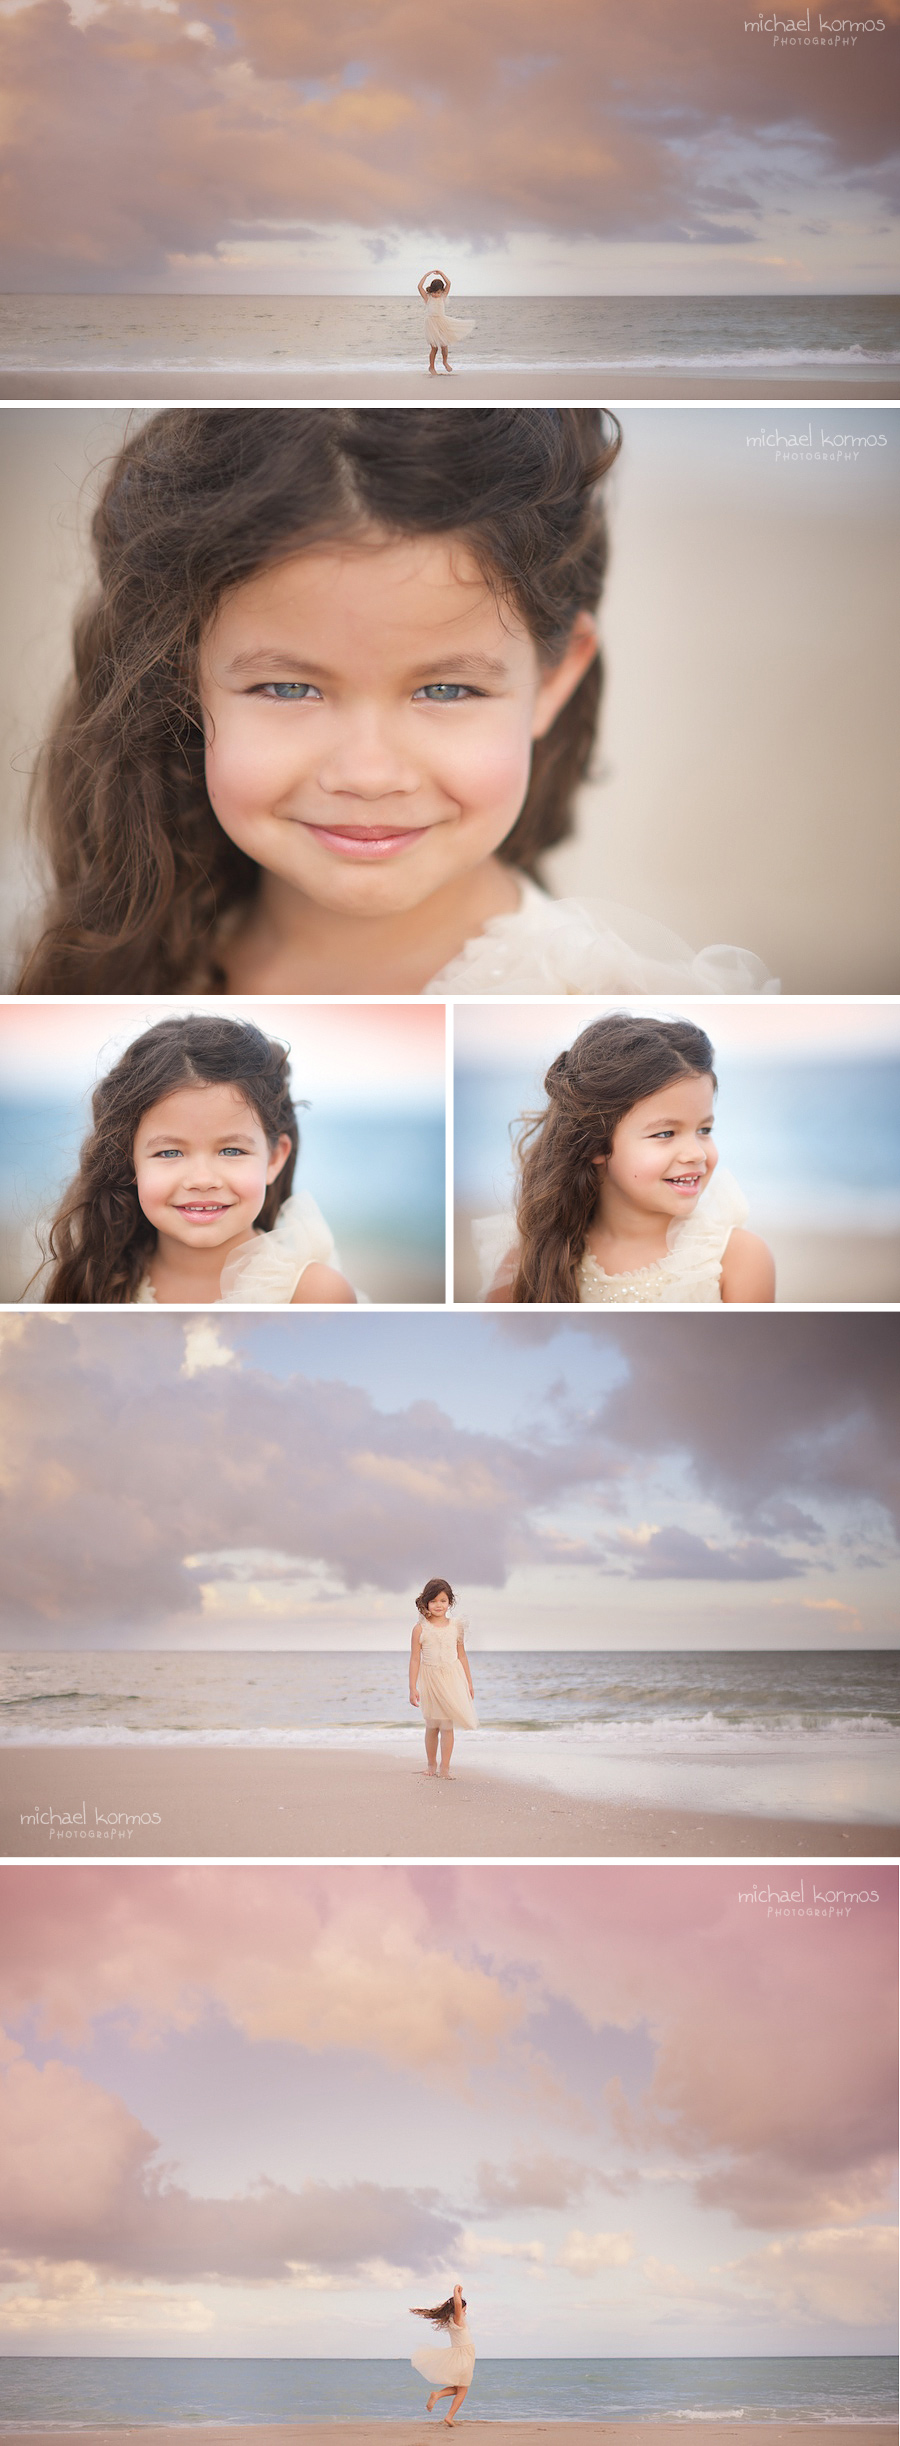 Photographer Michael Kormos captures lifestyle child model photography of three 6-year old girls during a fun experience at the beach